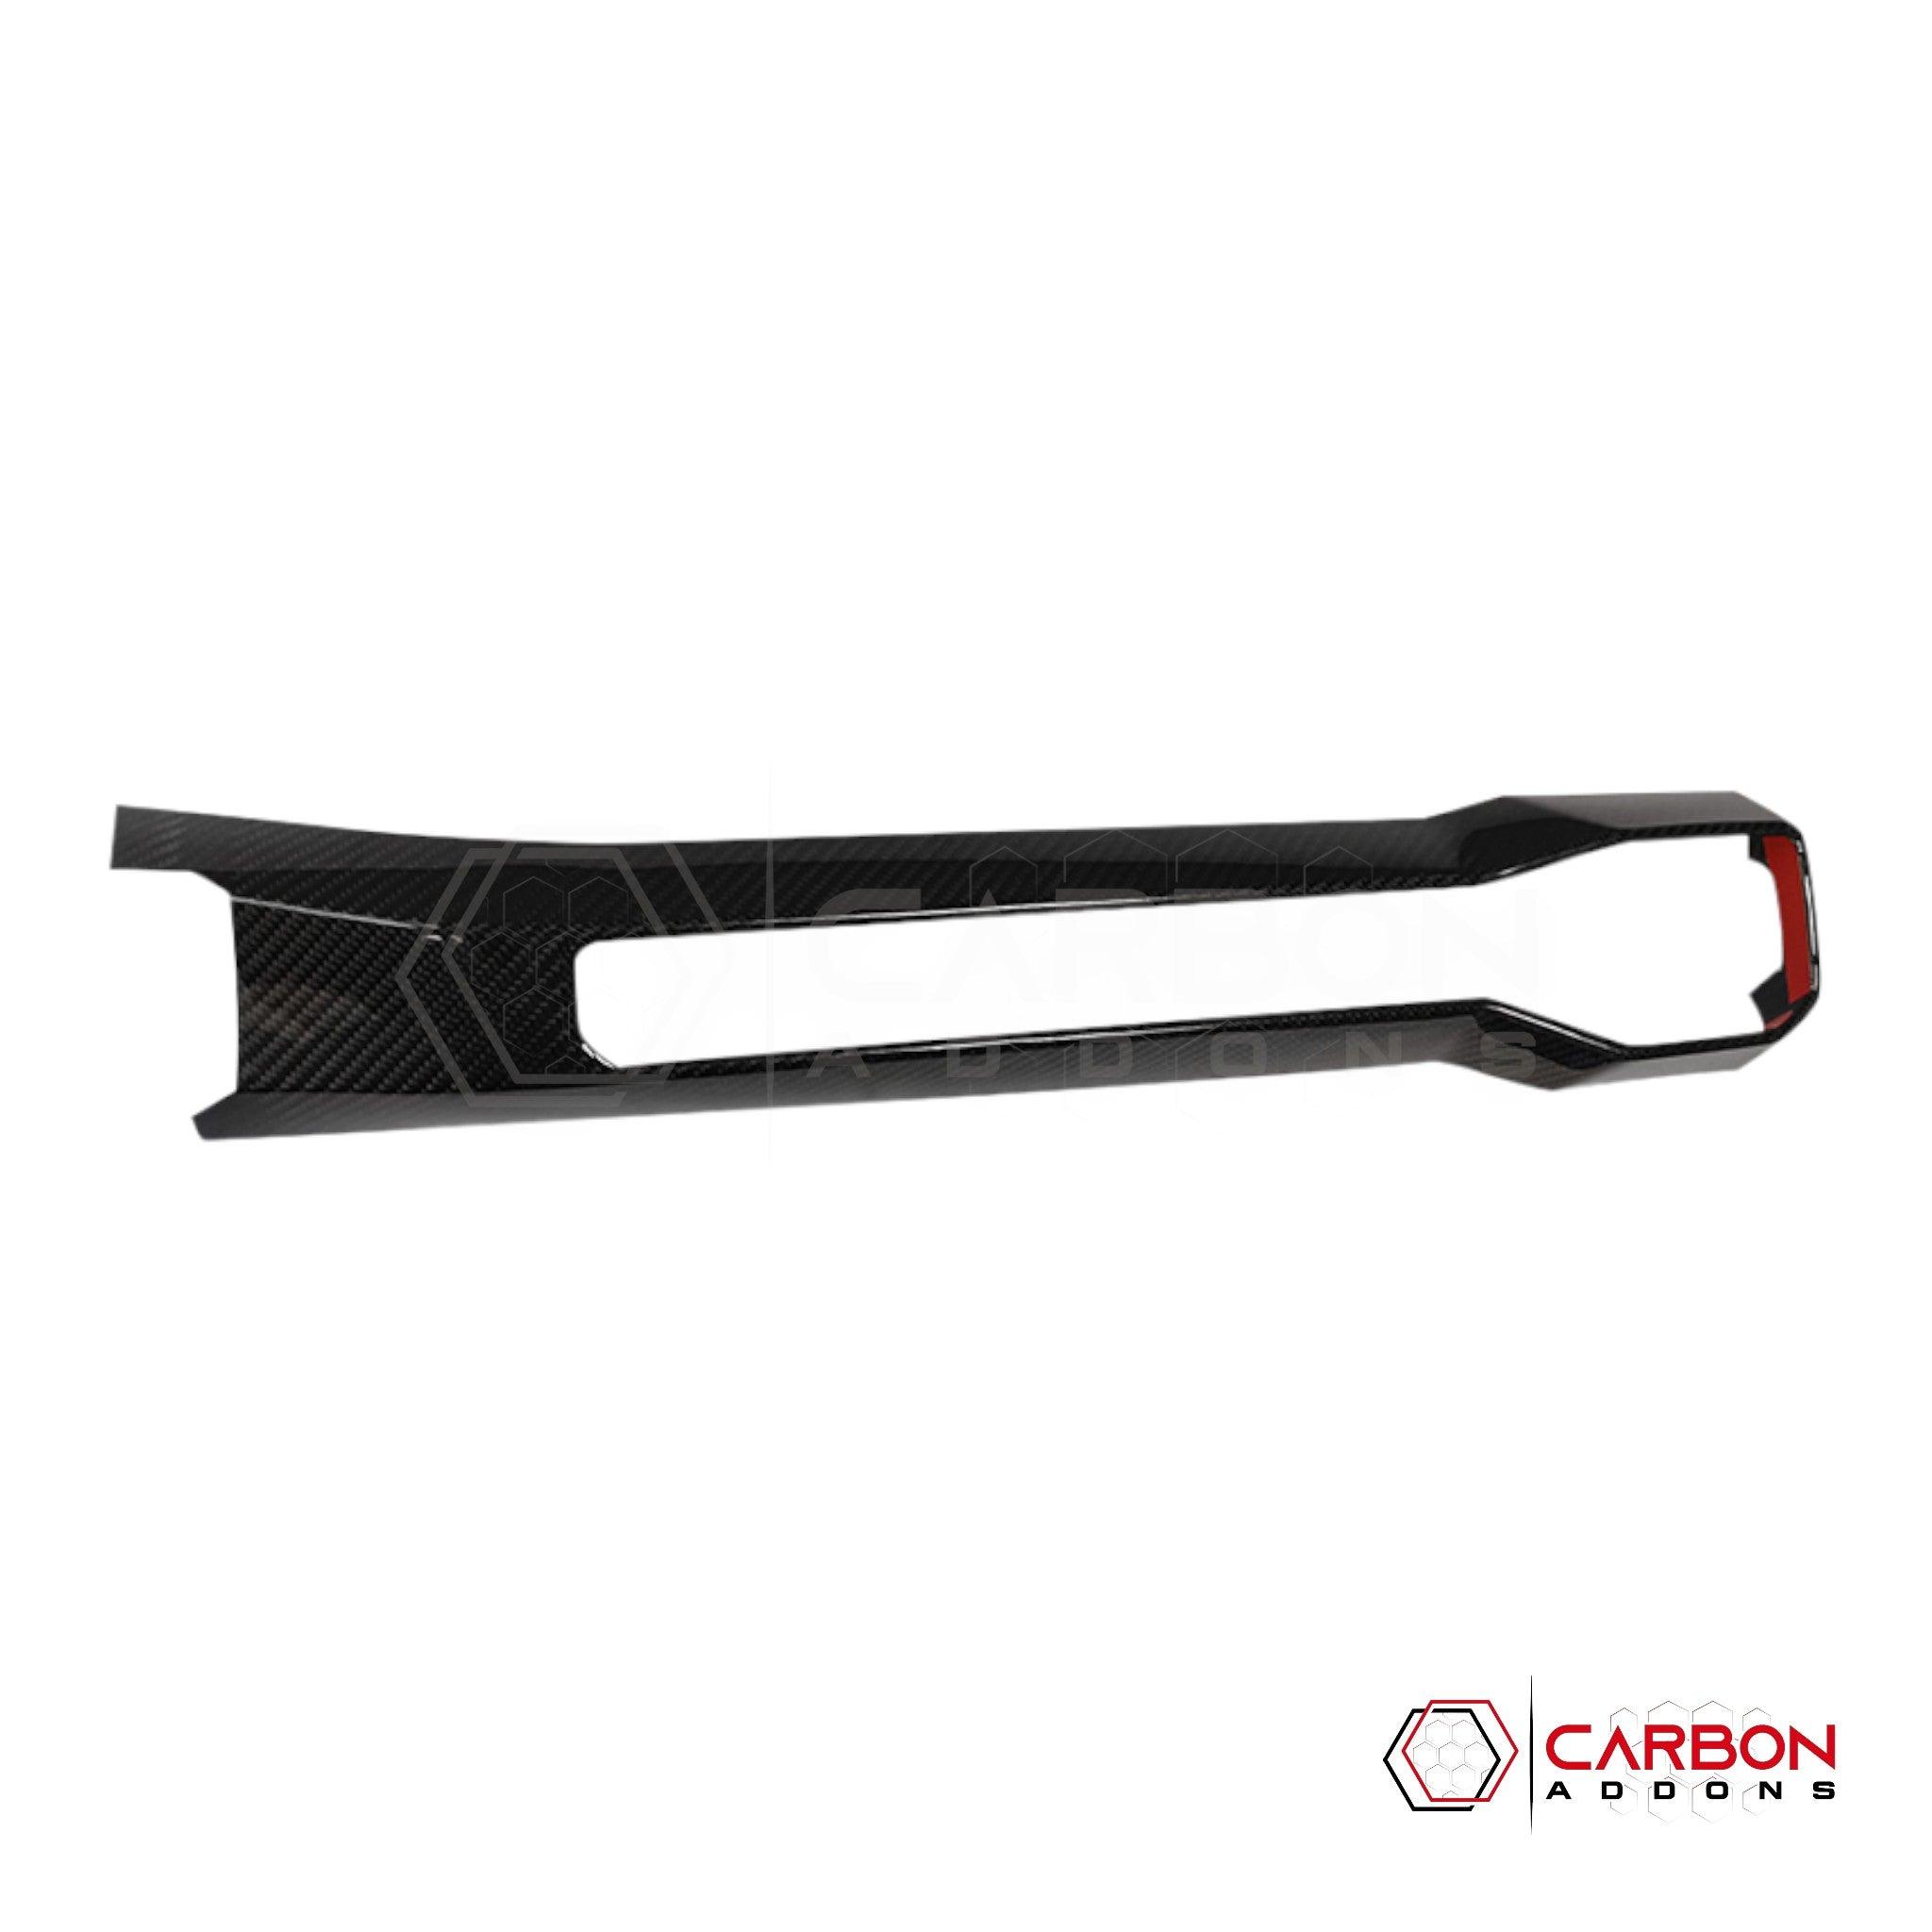 [Coming Soon] 2024-Up S650 Ford Mustang Hard Carbon Fiber Passenger Side Dashboard Trim Cover - carbonaddons Carbon Fiber Parts, Accessories, Upgrades, Mods